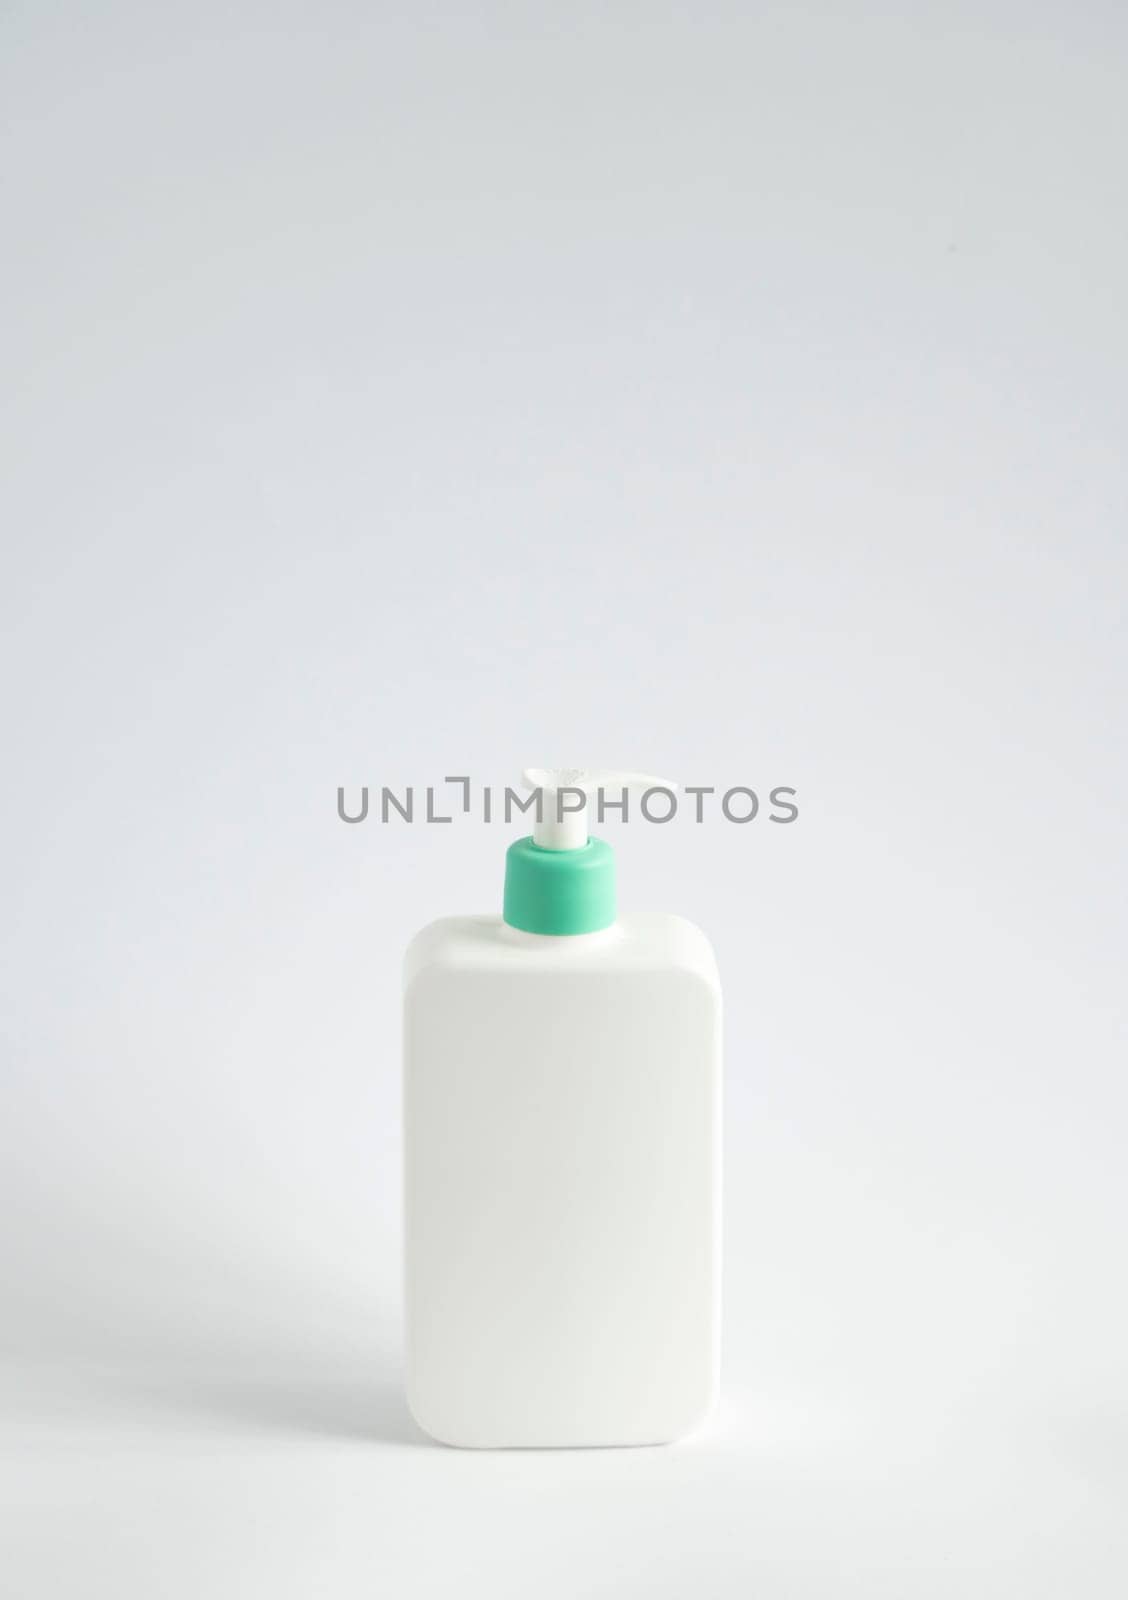 Blank body cream, lotion, shampoo or shower gel bottle photo. White plastic container isolated on white background. by vovsht